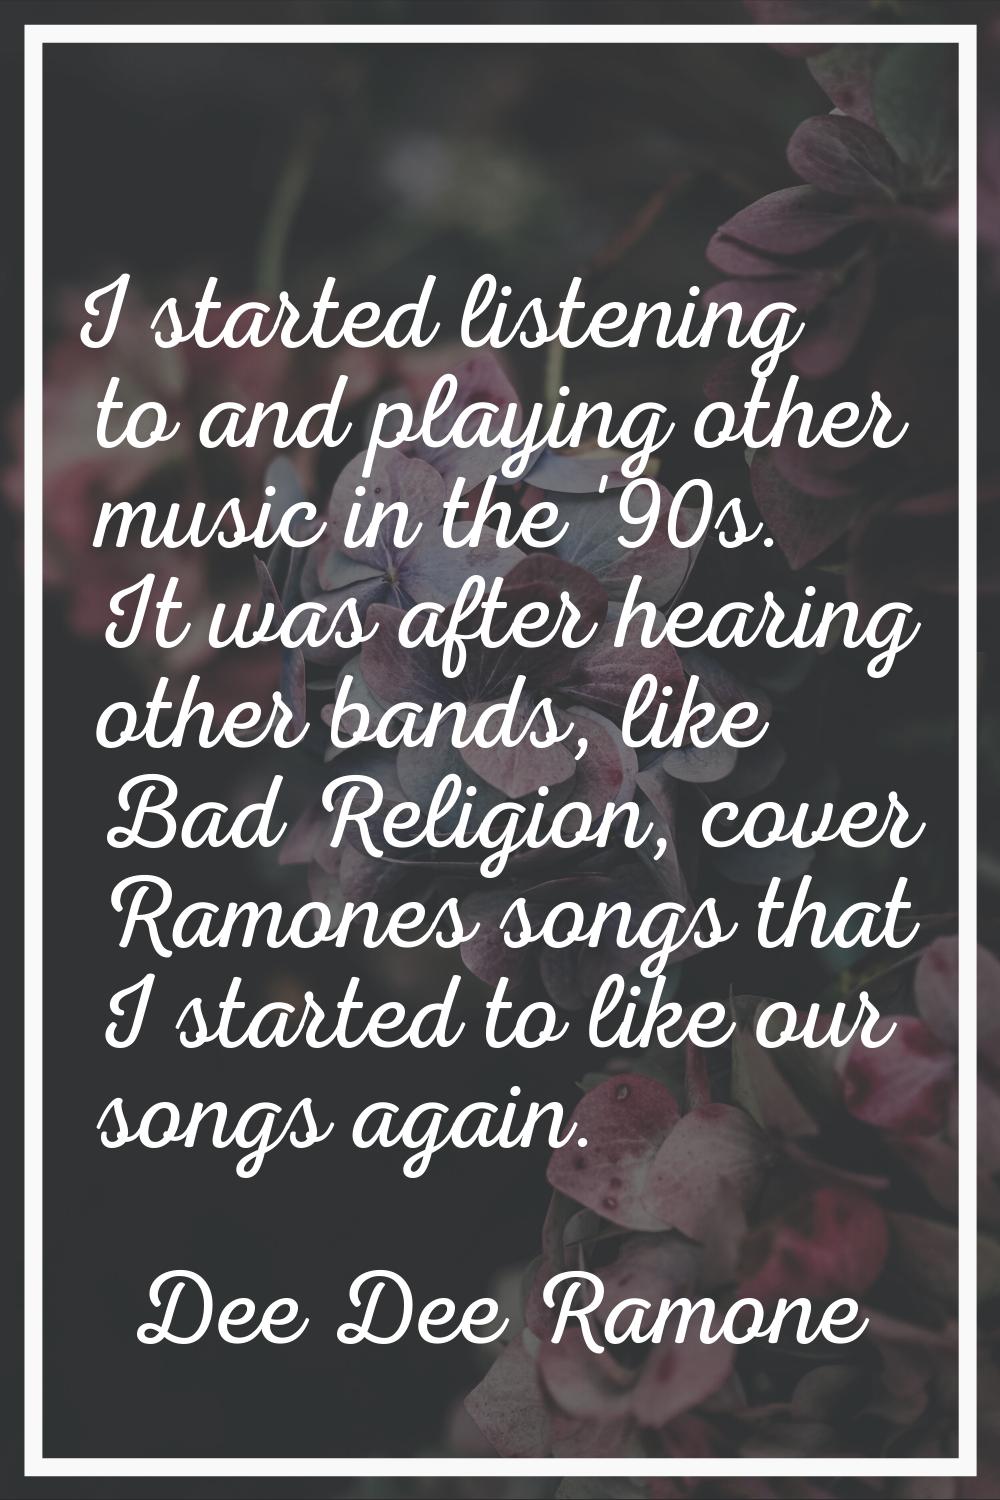 I started listening to and playing other music in the '90s. It was after hearing other bands, like 